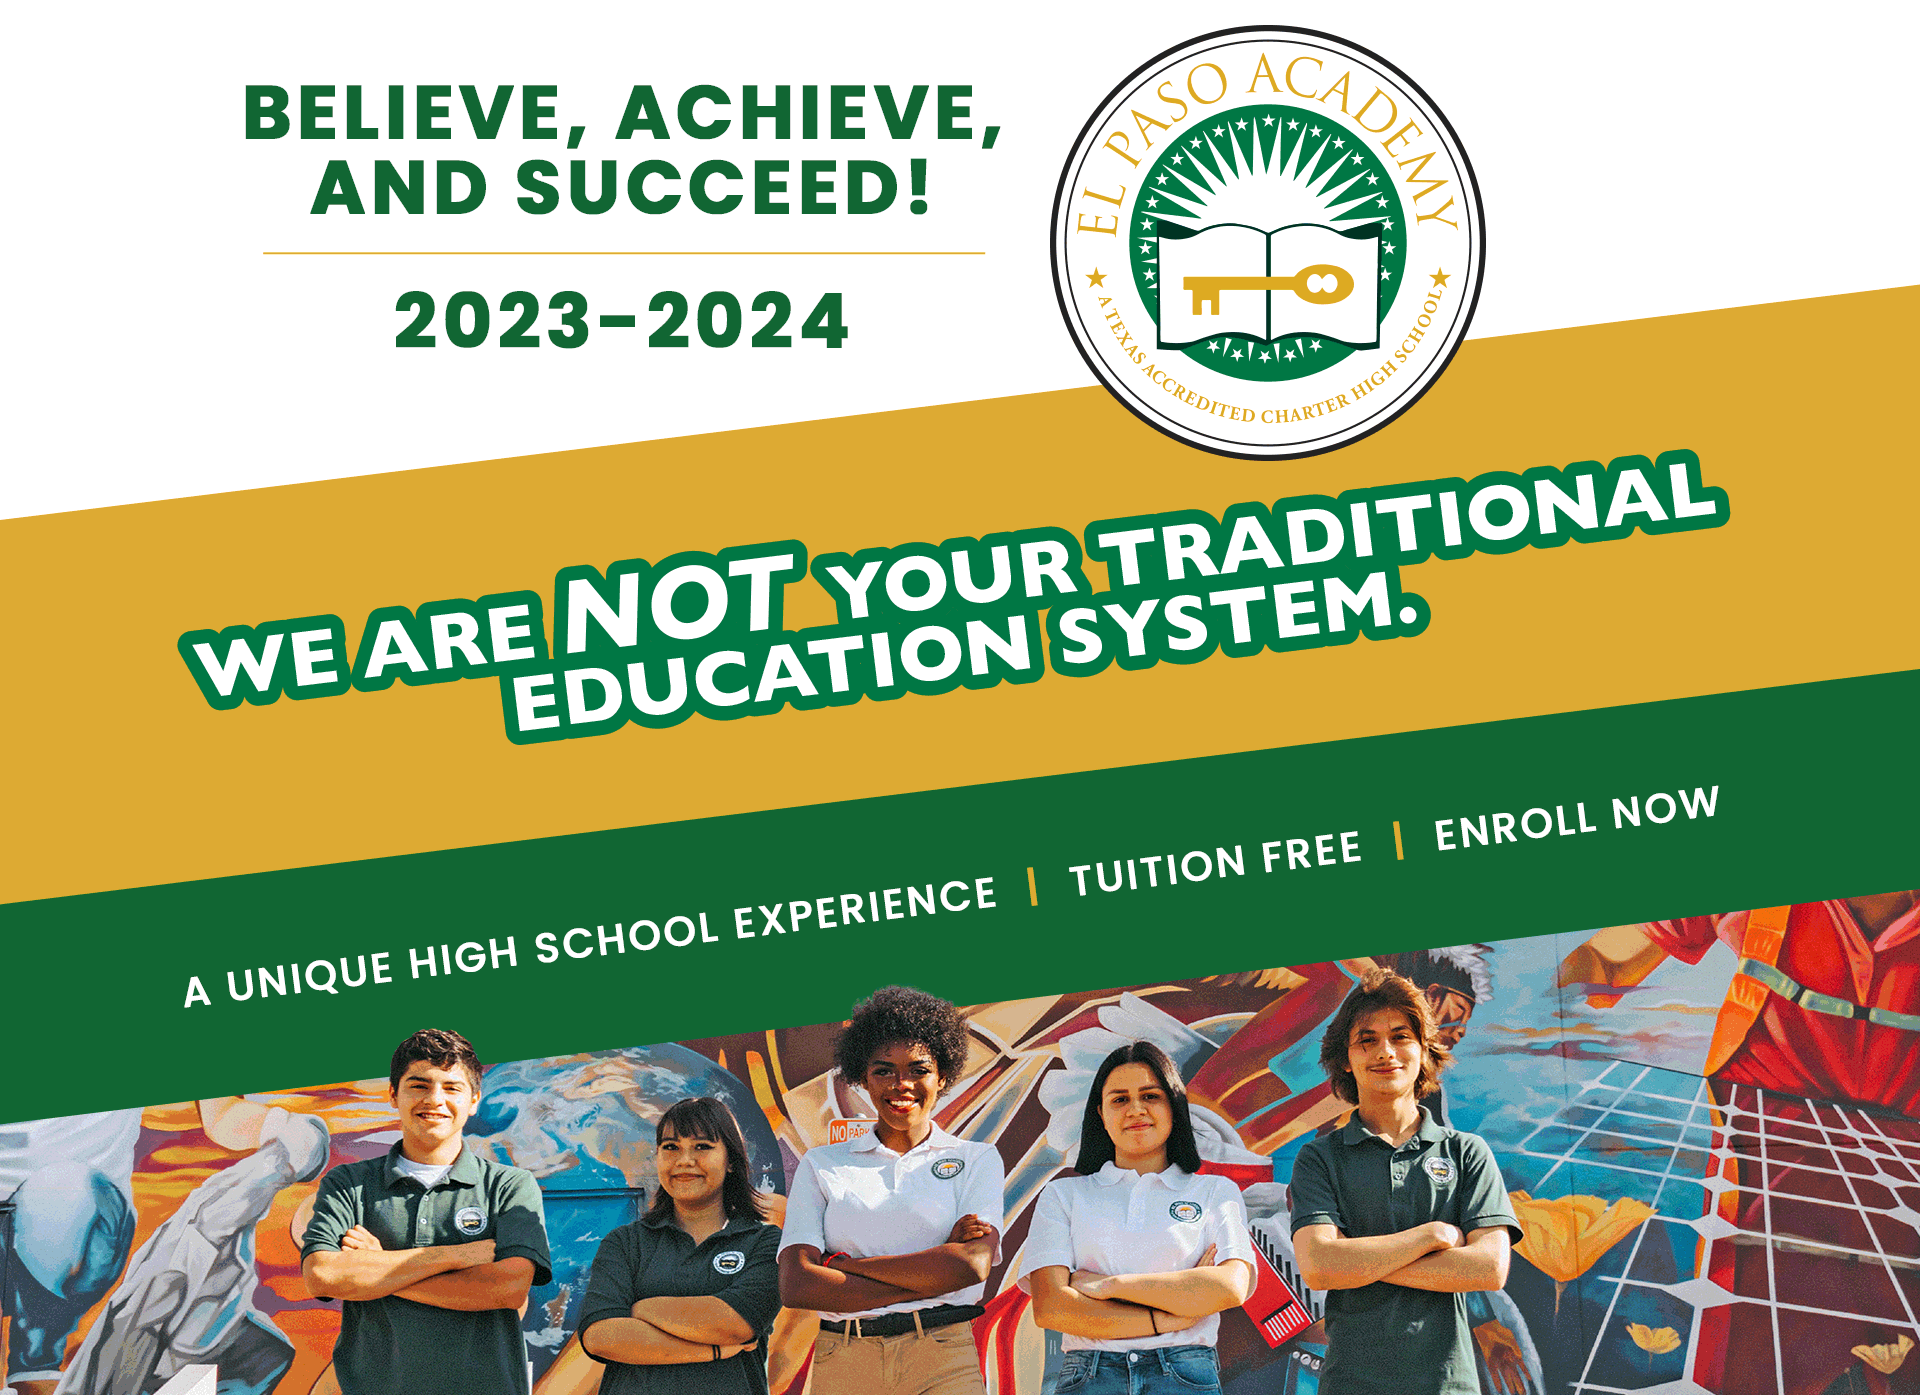 We are not your traditional education system.